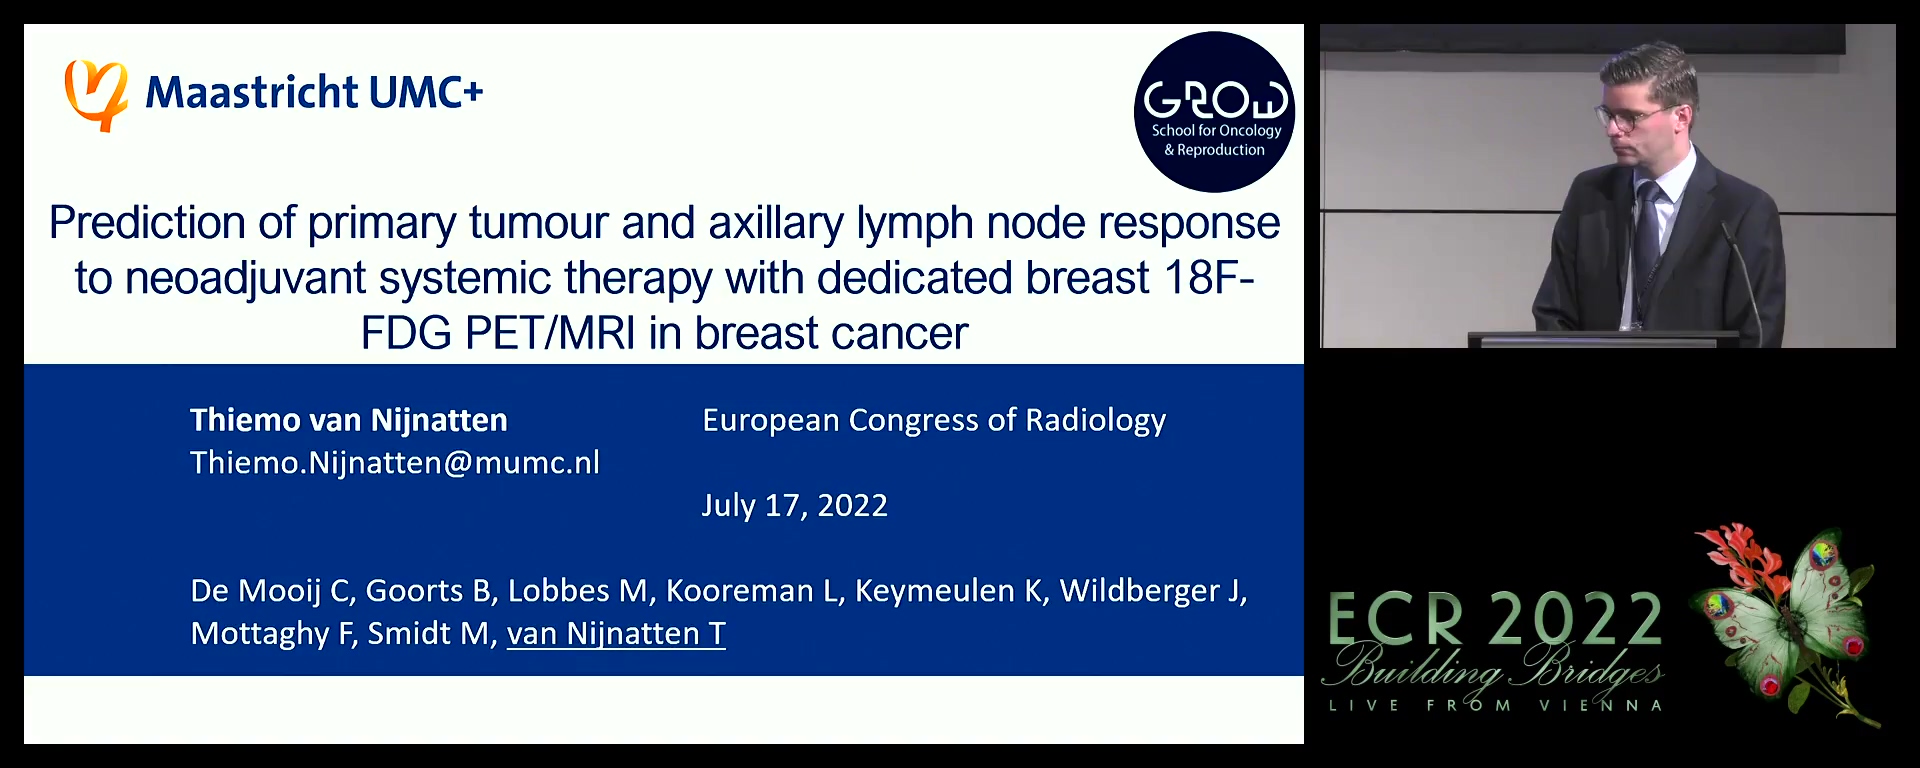 Prediction of primary tumour and axillary lymph node response to neoadjuvant systemic therapy with dedicated breast 18F-FDG PET/MRI in breast cancer - Thiemo van Nijnatten, Maastricht / NL